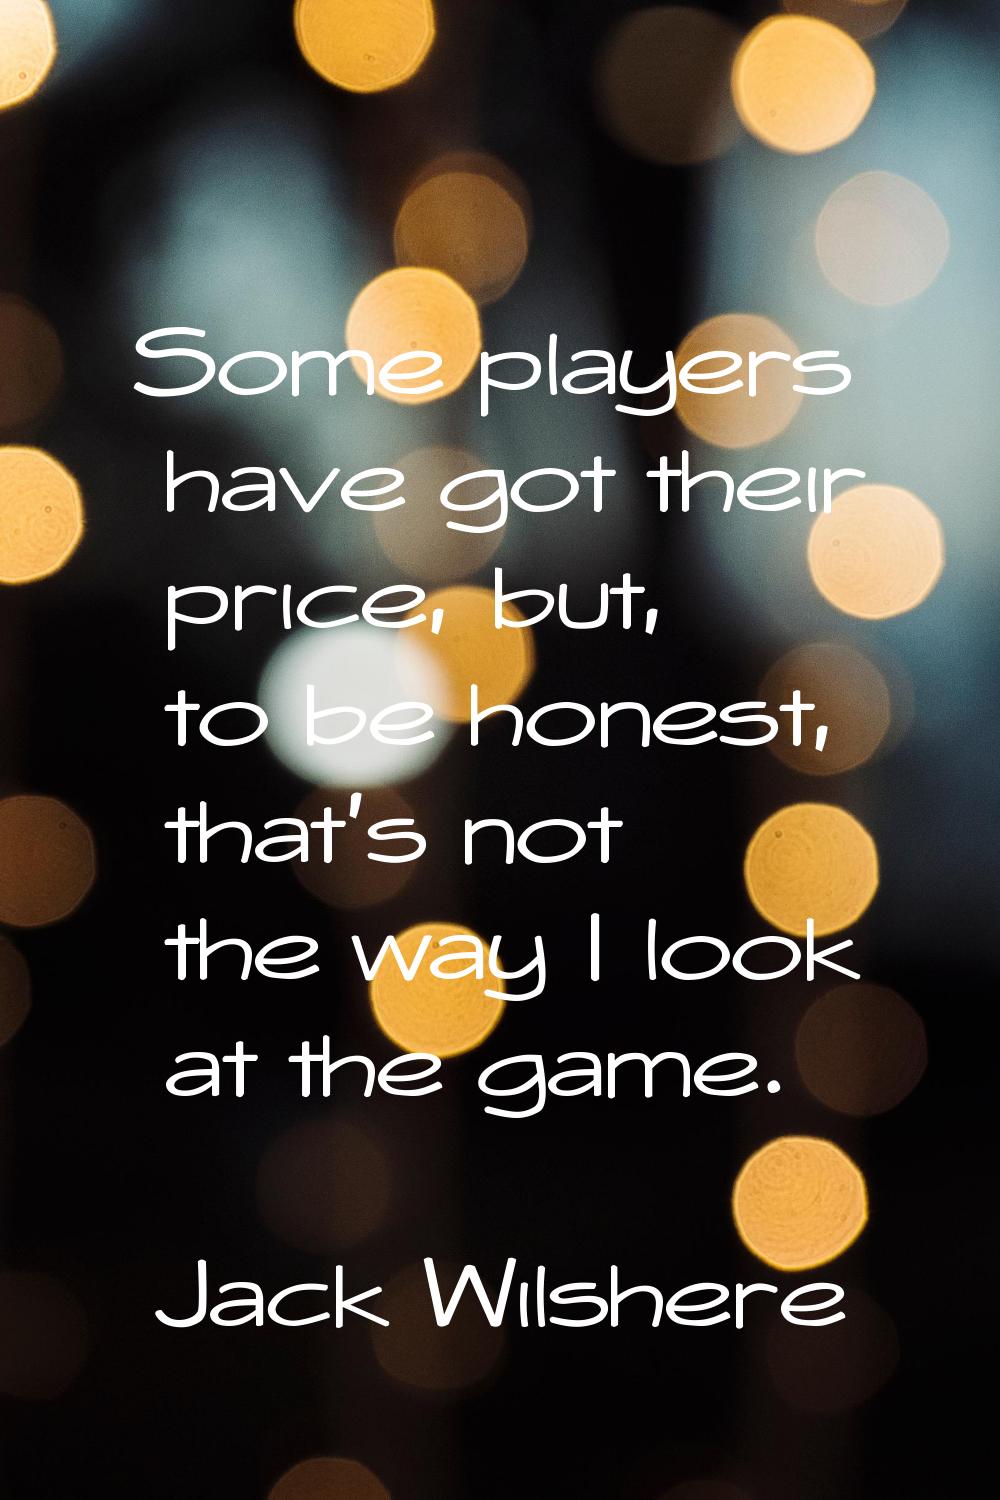 Some players have got their price, but, to be honest, that's not the way I look at the game.